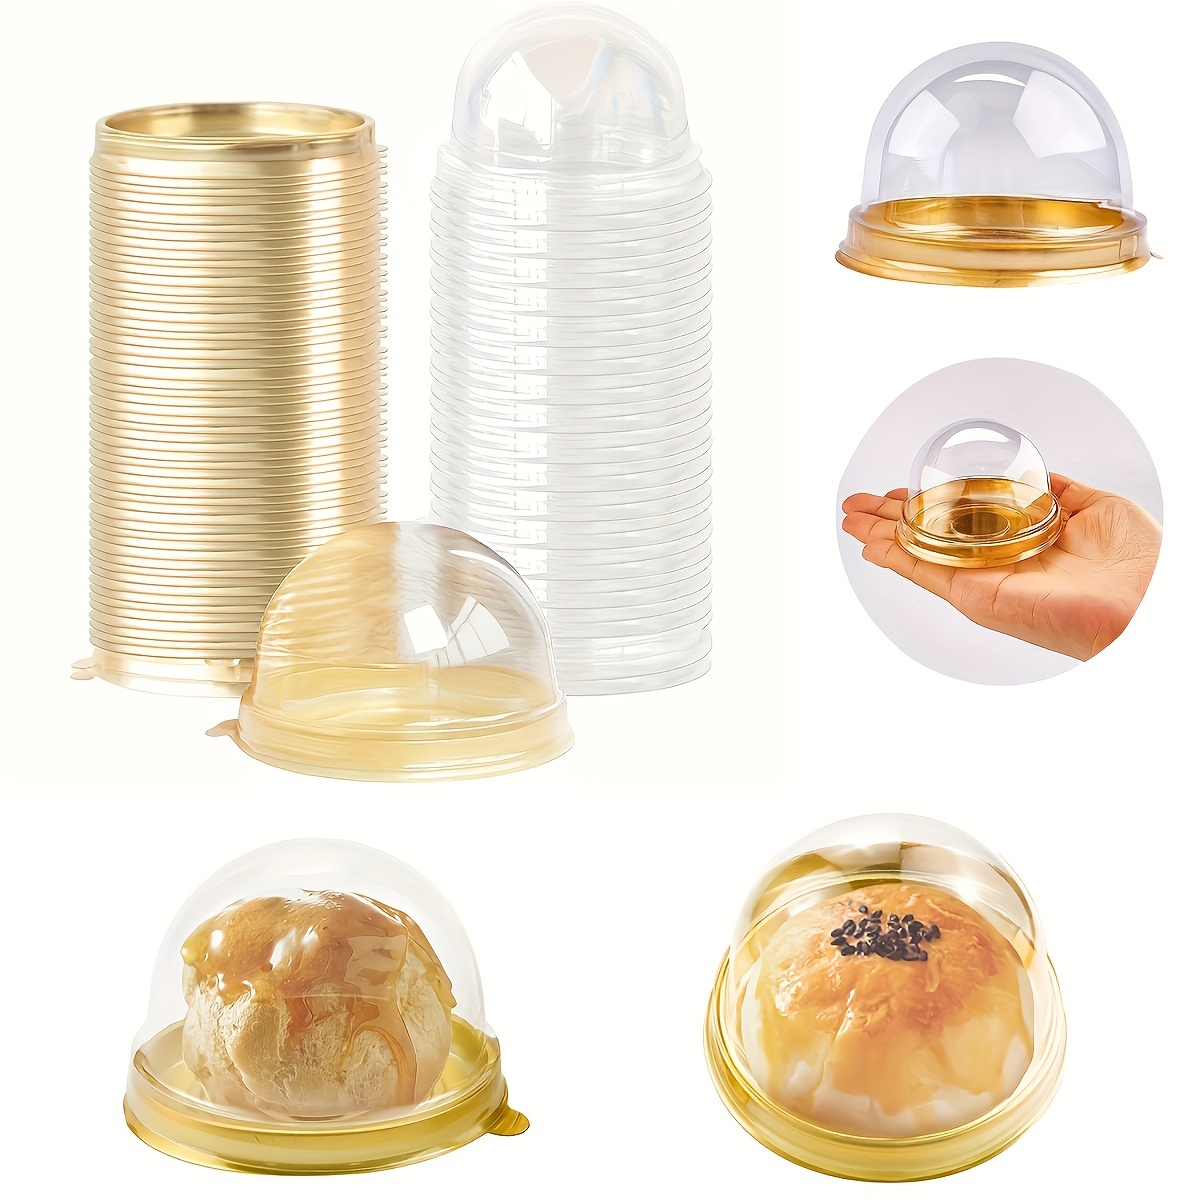 

50pcs, Clear Plastic Mini Cake Boxes With Lids, Round Cupcake Holders, Plastic Egg-yolk Puff Containers, Mooncake Dome Boxes, Baking Packing Boxes, Kitchen Baking Tools, Small Business Supplies